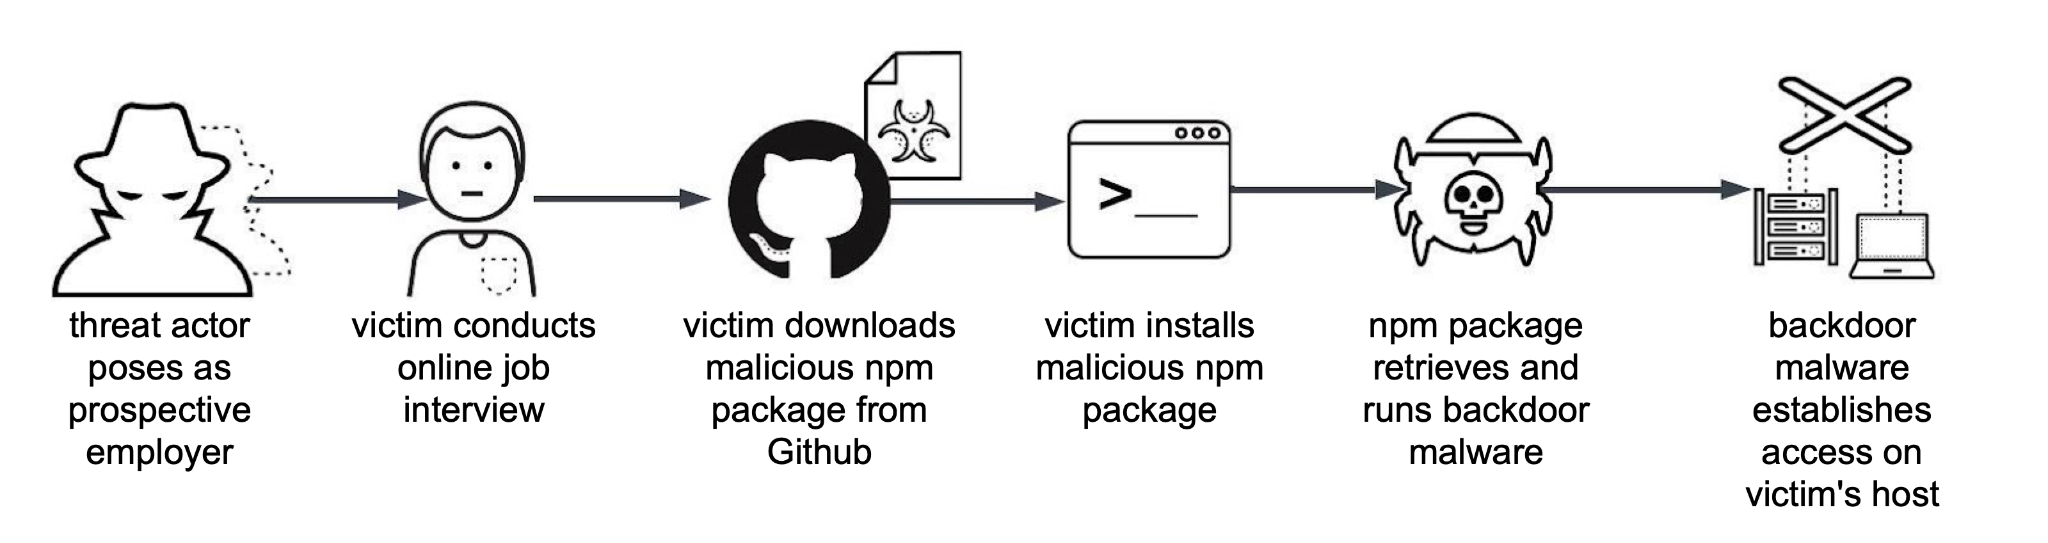 Image 1 is the attack chain for CL-STA-0240. Threat actor poses as prospective employer. Victim conducts online job interview. Victim downloads malicious amp package from GitHub. Victim installs malicious npm package. Npm package retrieves and runs backdoor malware. Backdoor malware establishes access on a victim’s host. 